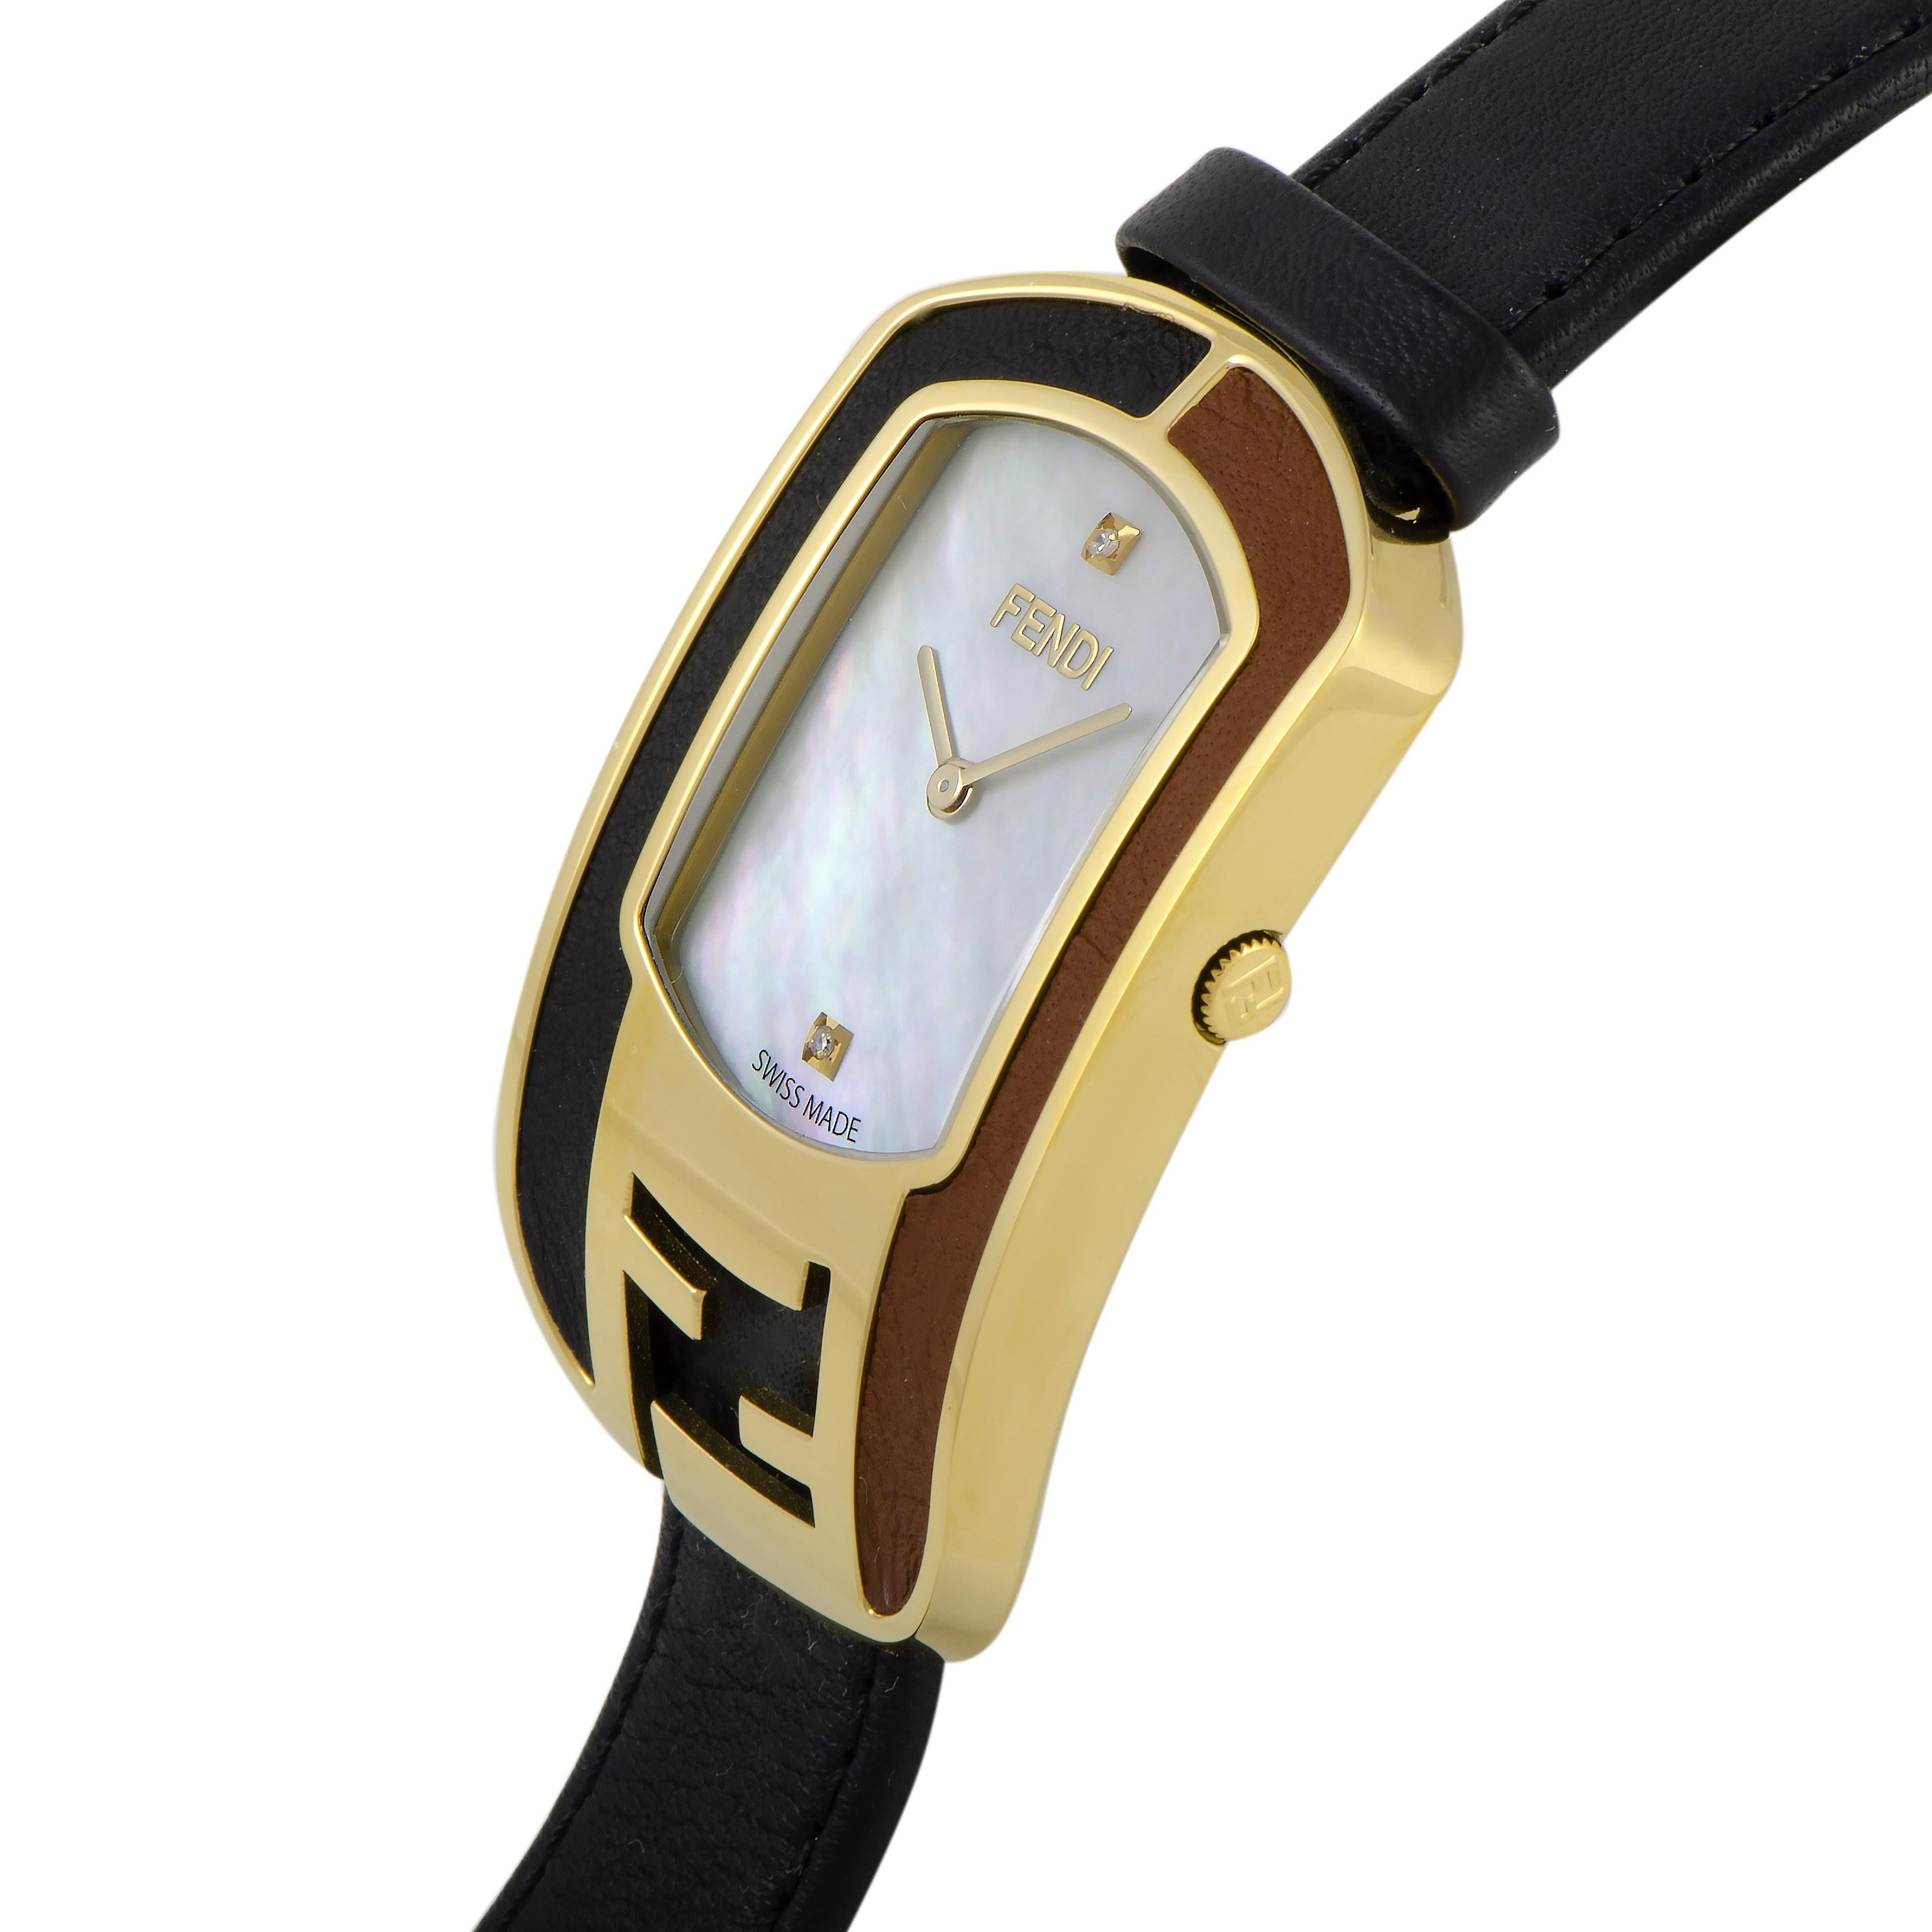 This is the Fendi Chameleon watch, reference number F331434511D1.

It is presented with a gold-tone stainless steel case that offers water resistance of 30 meters. The watch is worn on a black leather strap fitted with a tang buckle. The mother of